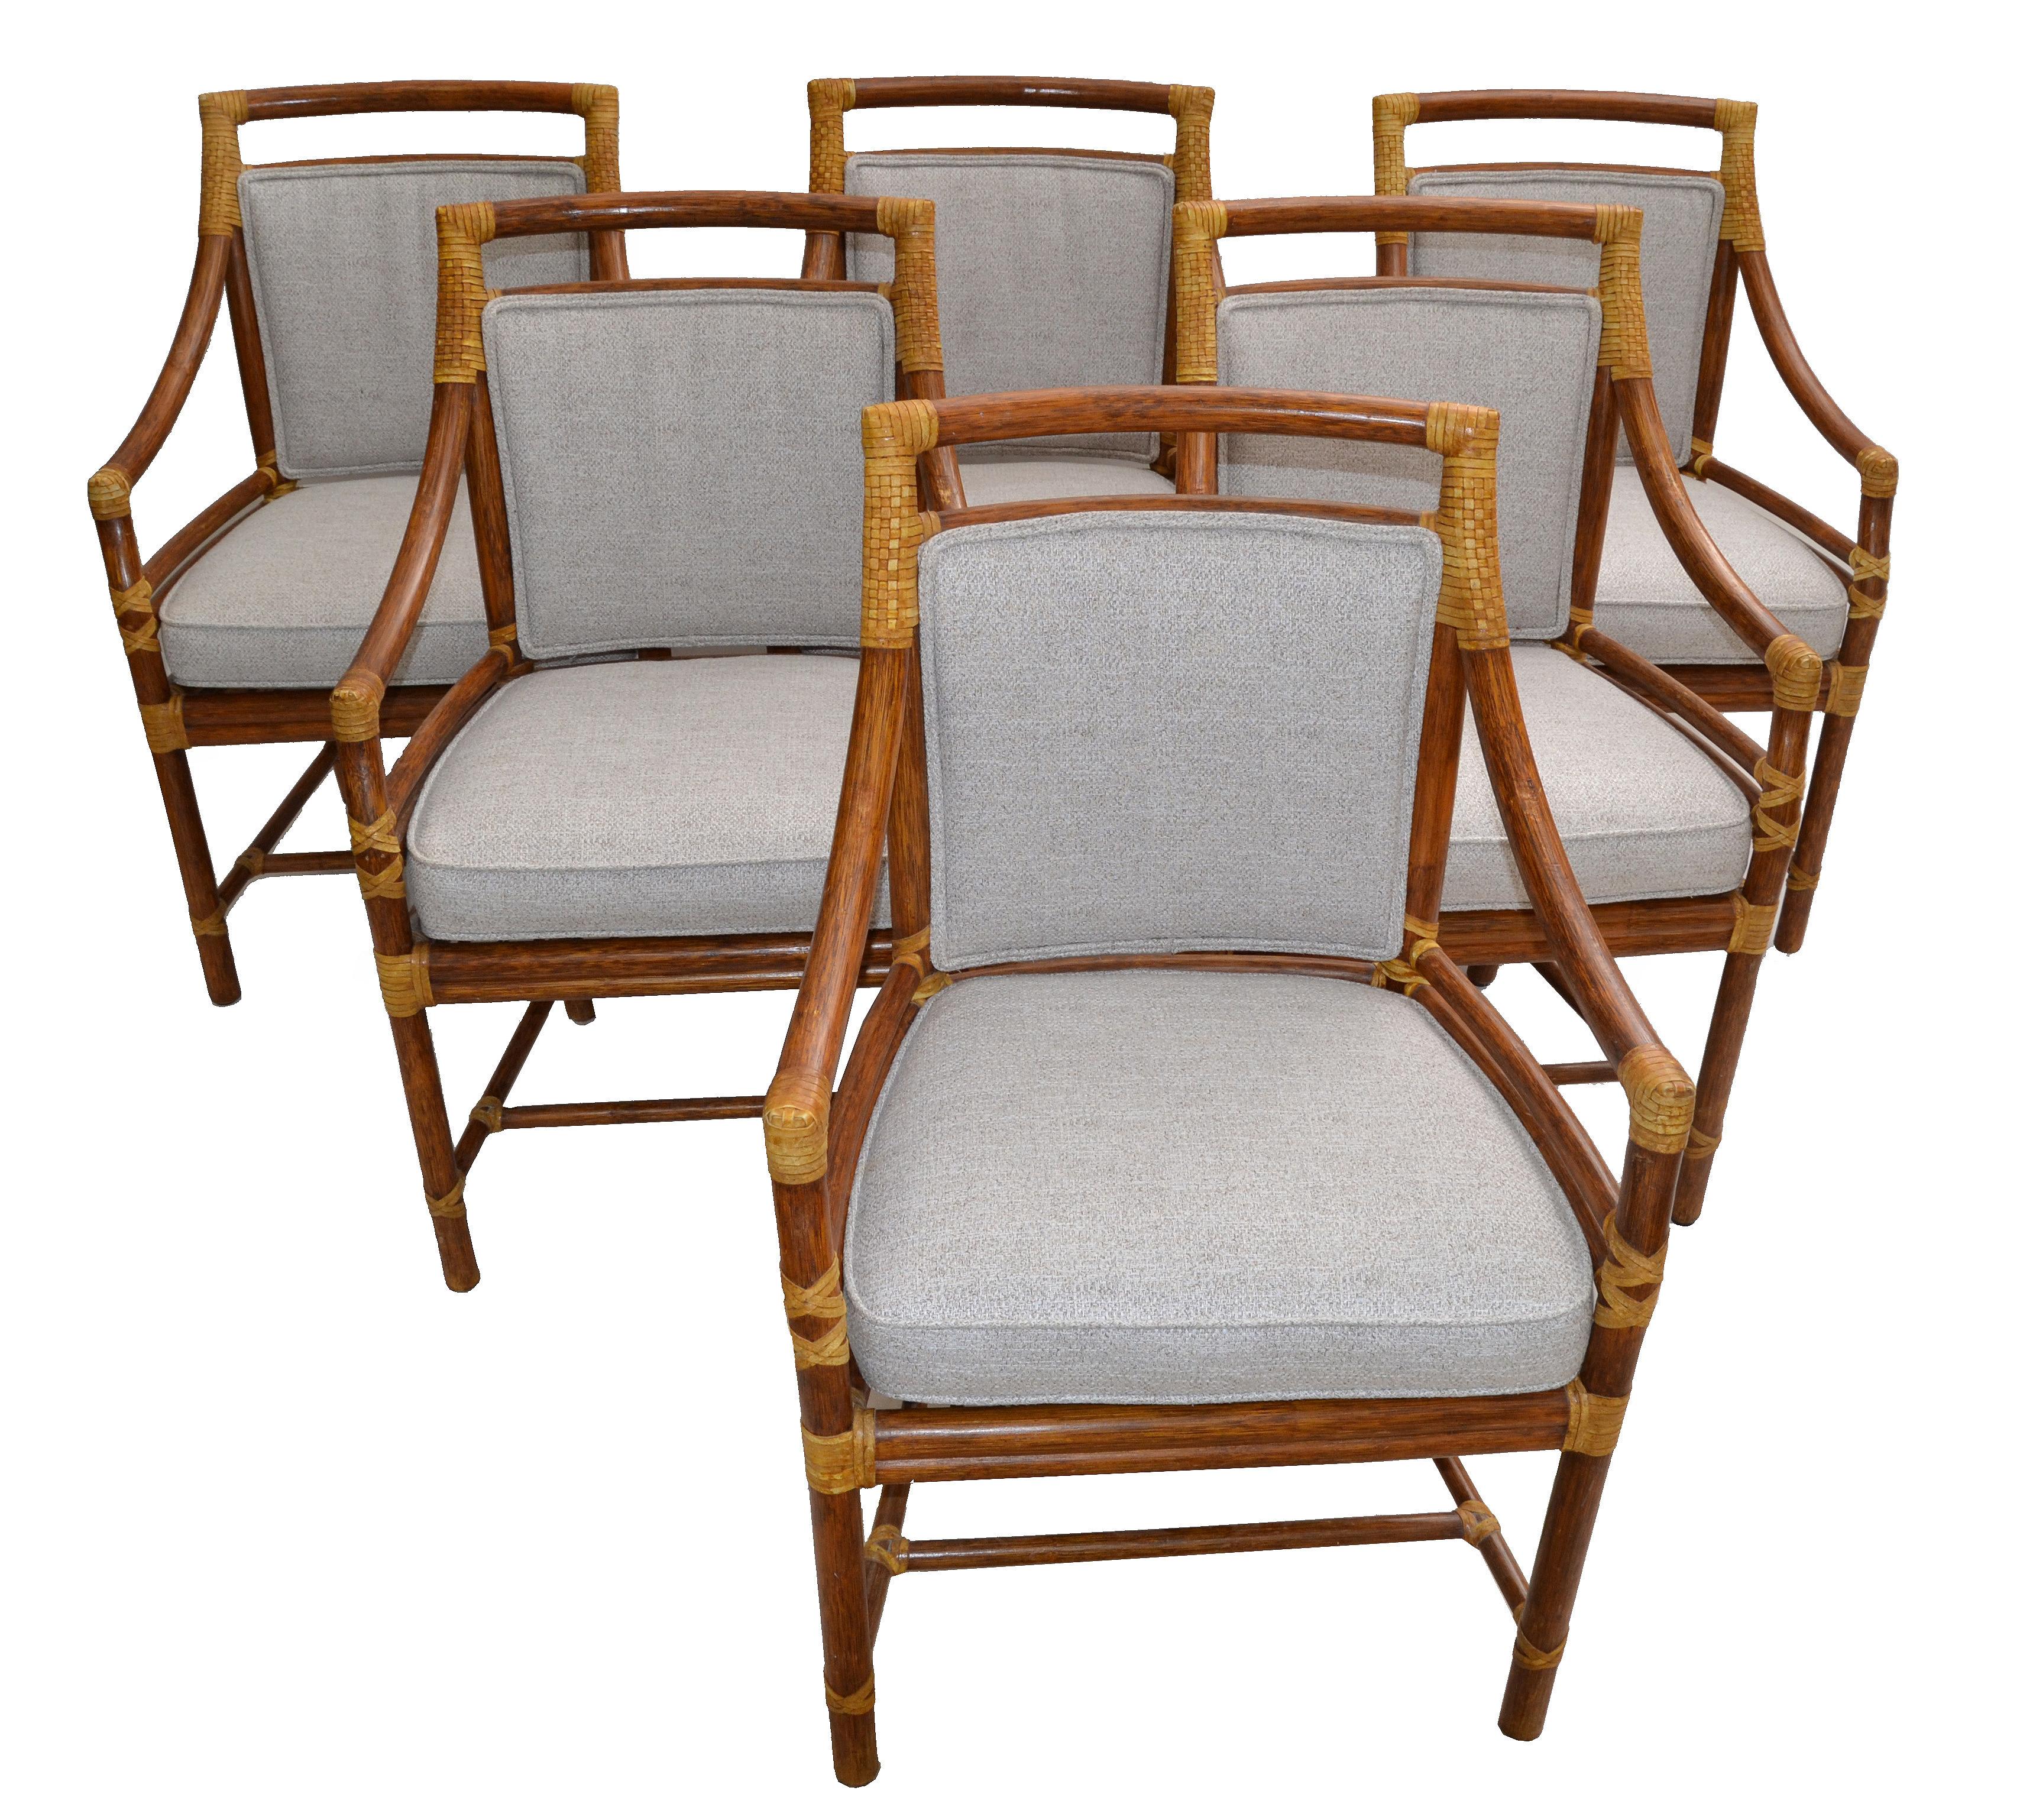 Set of 6 original McGuire bamboo and handwoven cane armchair, dining chair with leather bindings.
The upholstery is a beige boucle Fabric and note the stunner done backrest.
McGuire metal tag is attached underneath.
Measures: Arm height 25